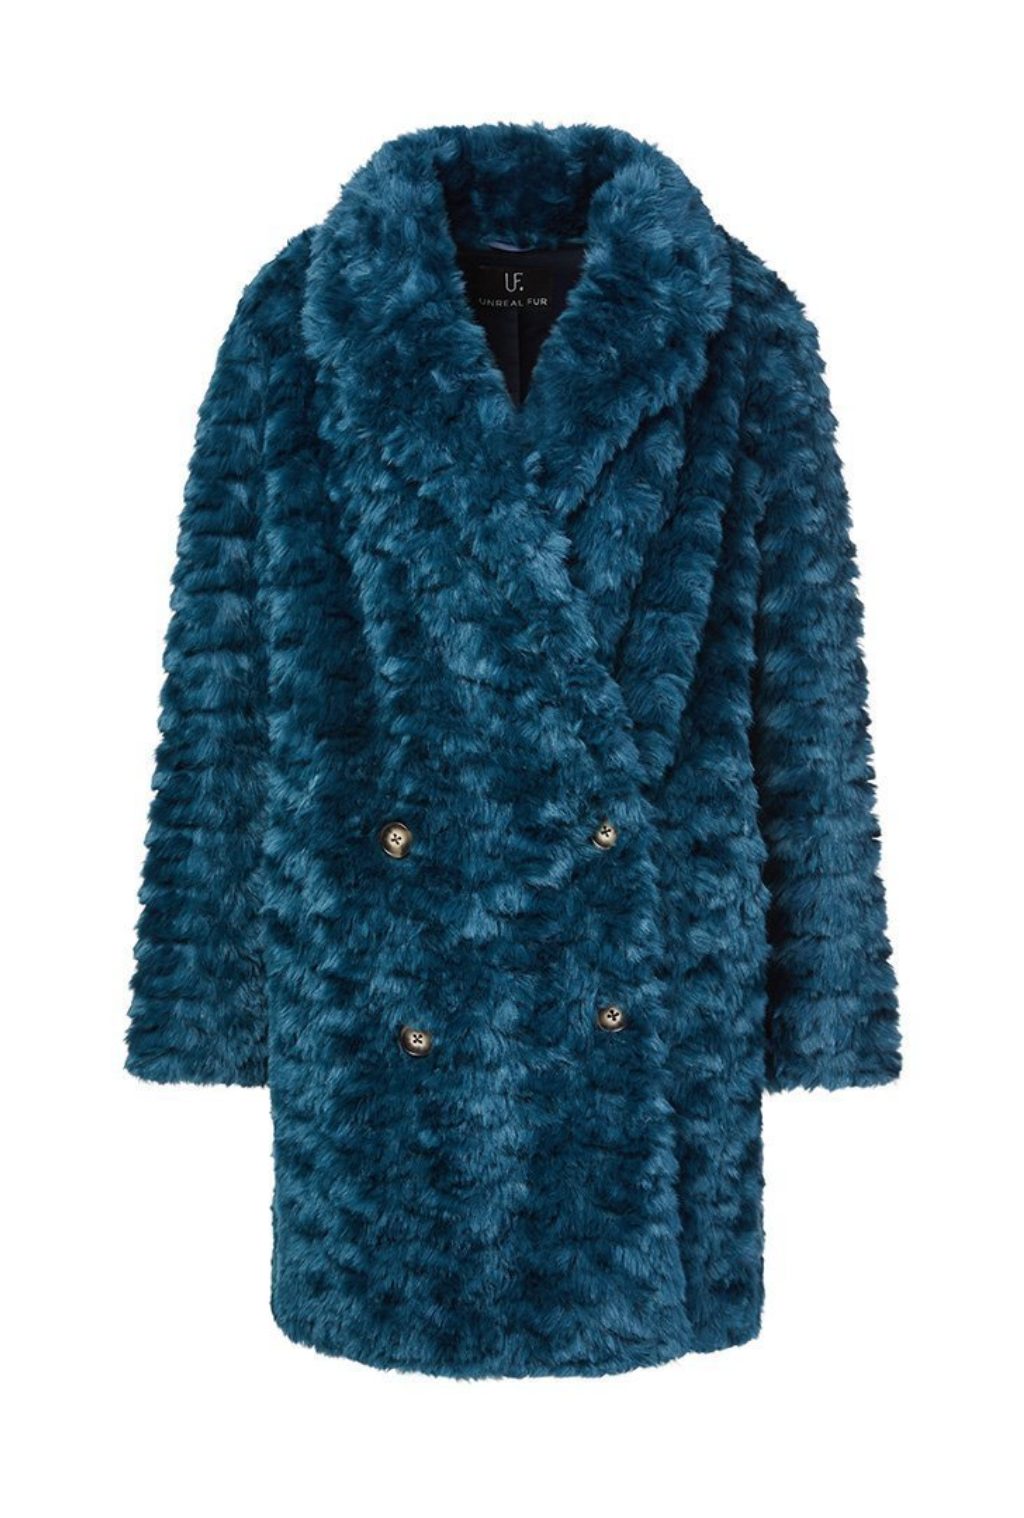 Fur And Square Coat | The Style Capsule